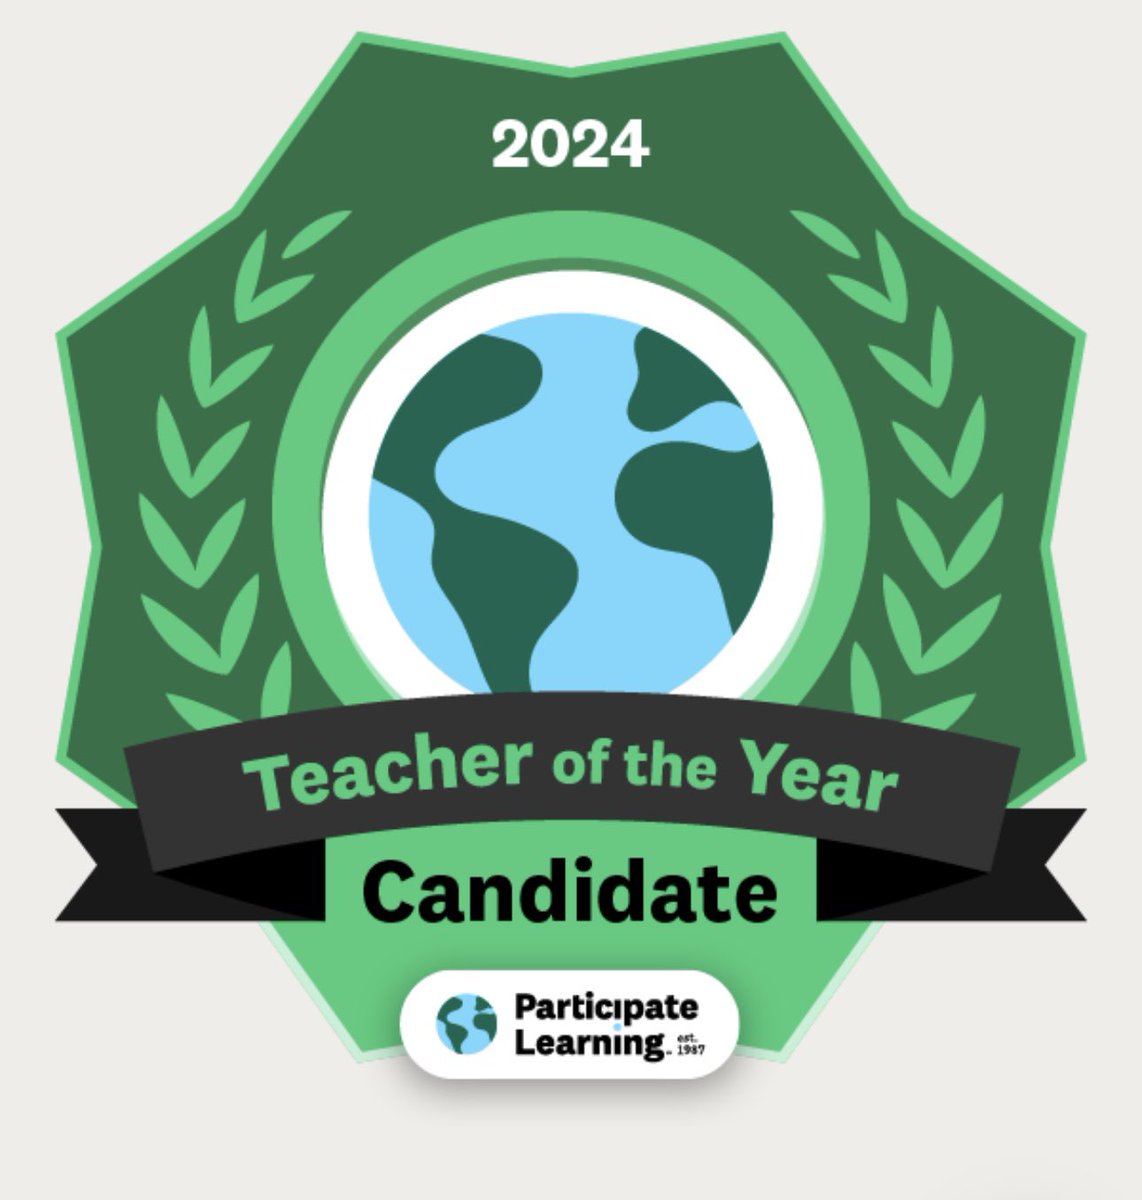 Congratulations to myself becoming the Teacher of the Year Candidate! I enjoyed the journey to summarize my teaching and I unconsciously raised the corners of my mouth and felt very happy when I collected students’ work and video！@ParticipateLrng @JudyOuyang #unitingourworld